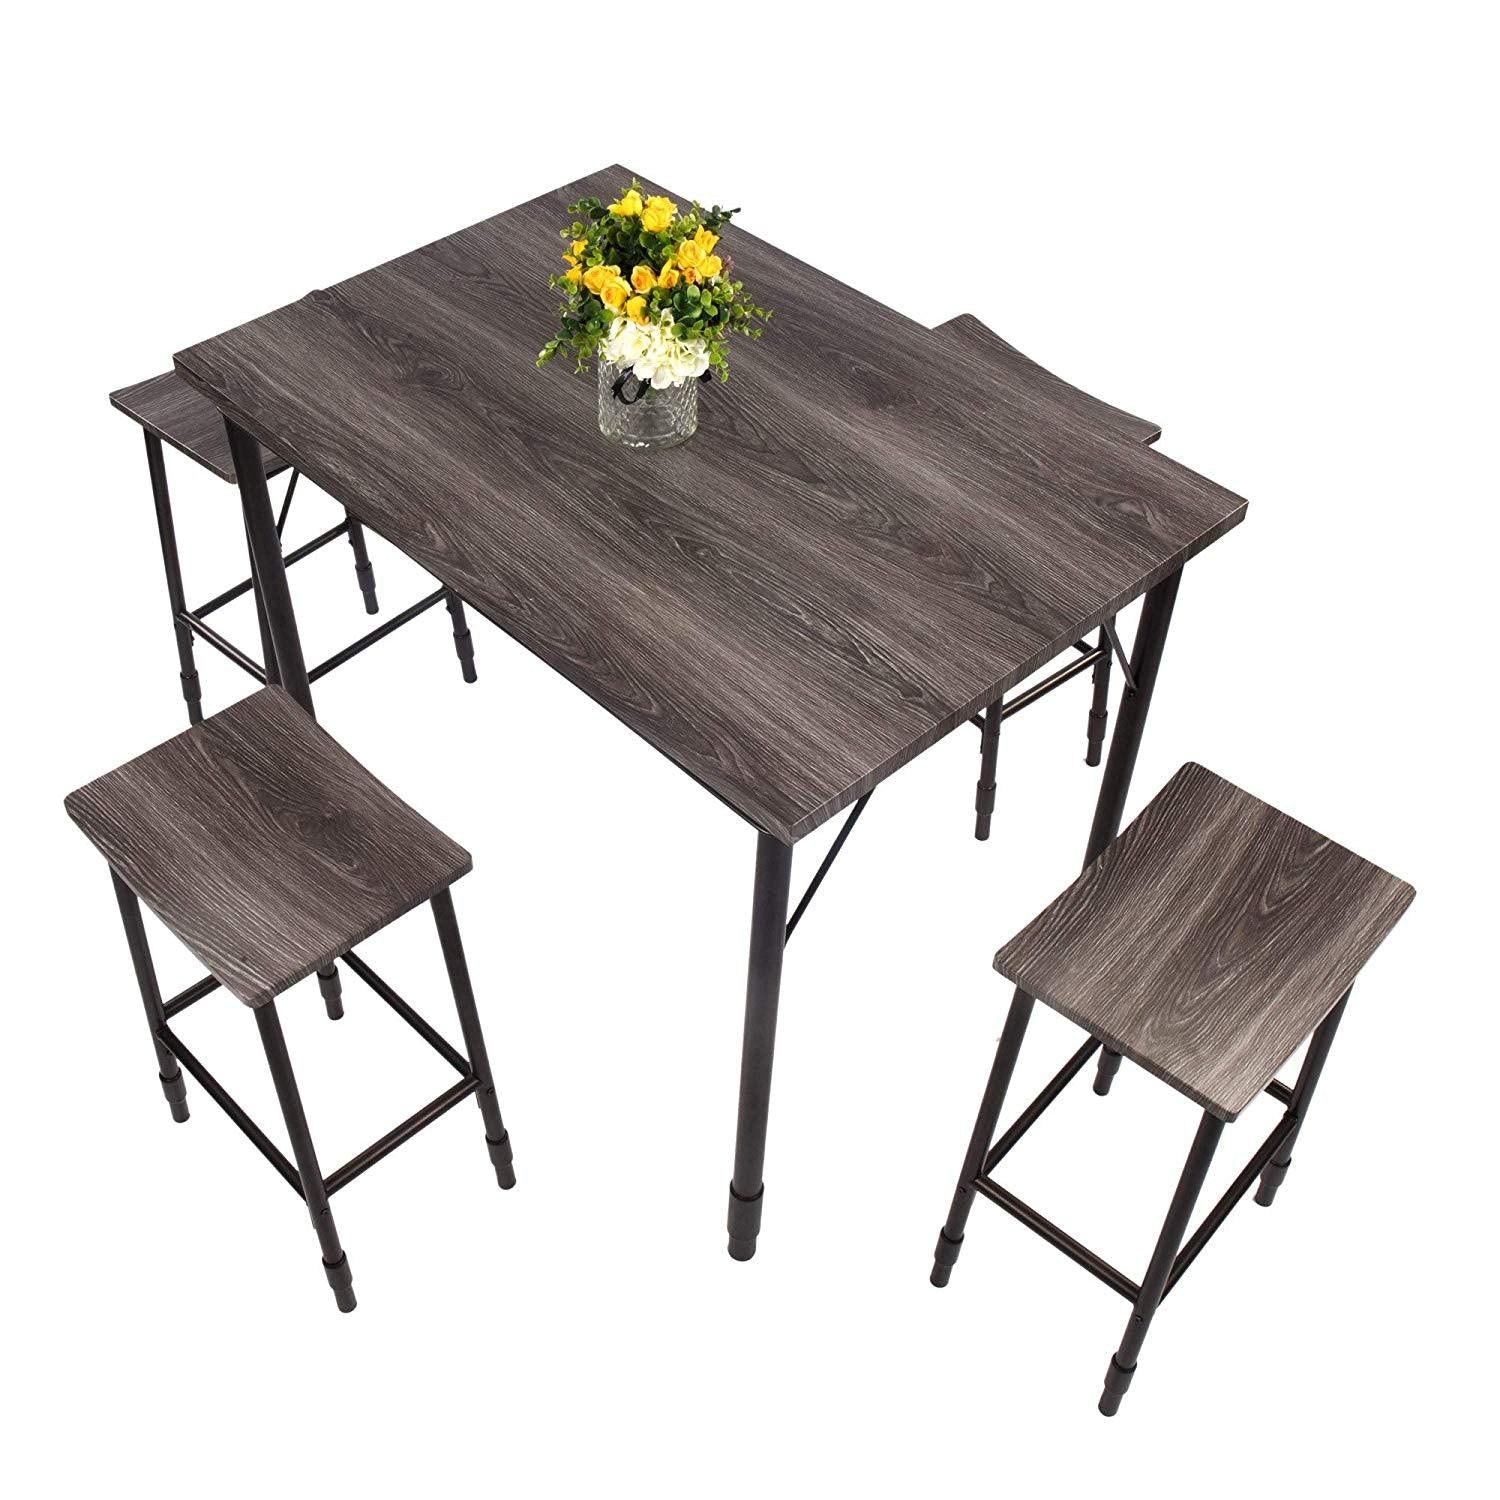 Bosonshop 5-Piece Dining Set with Metal Legs, Industrial Style, Wooden